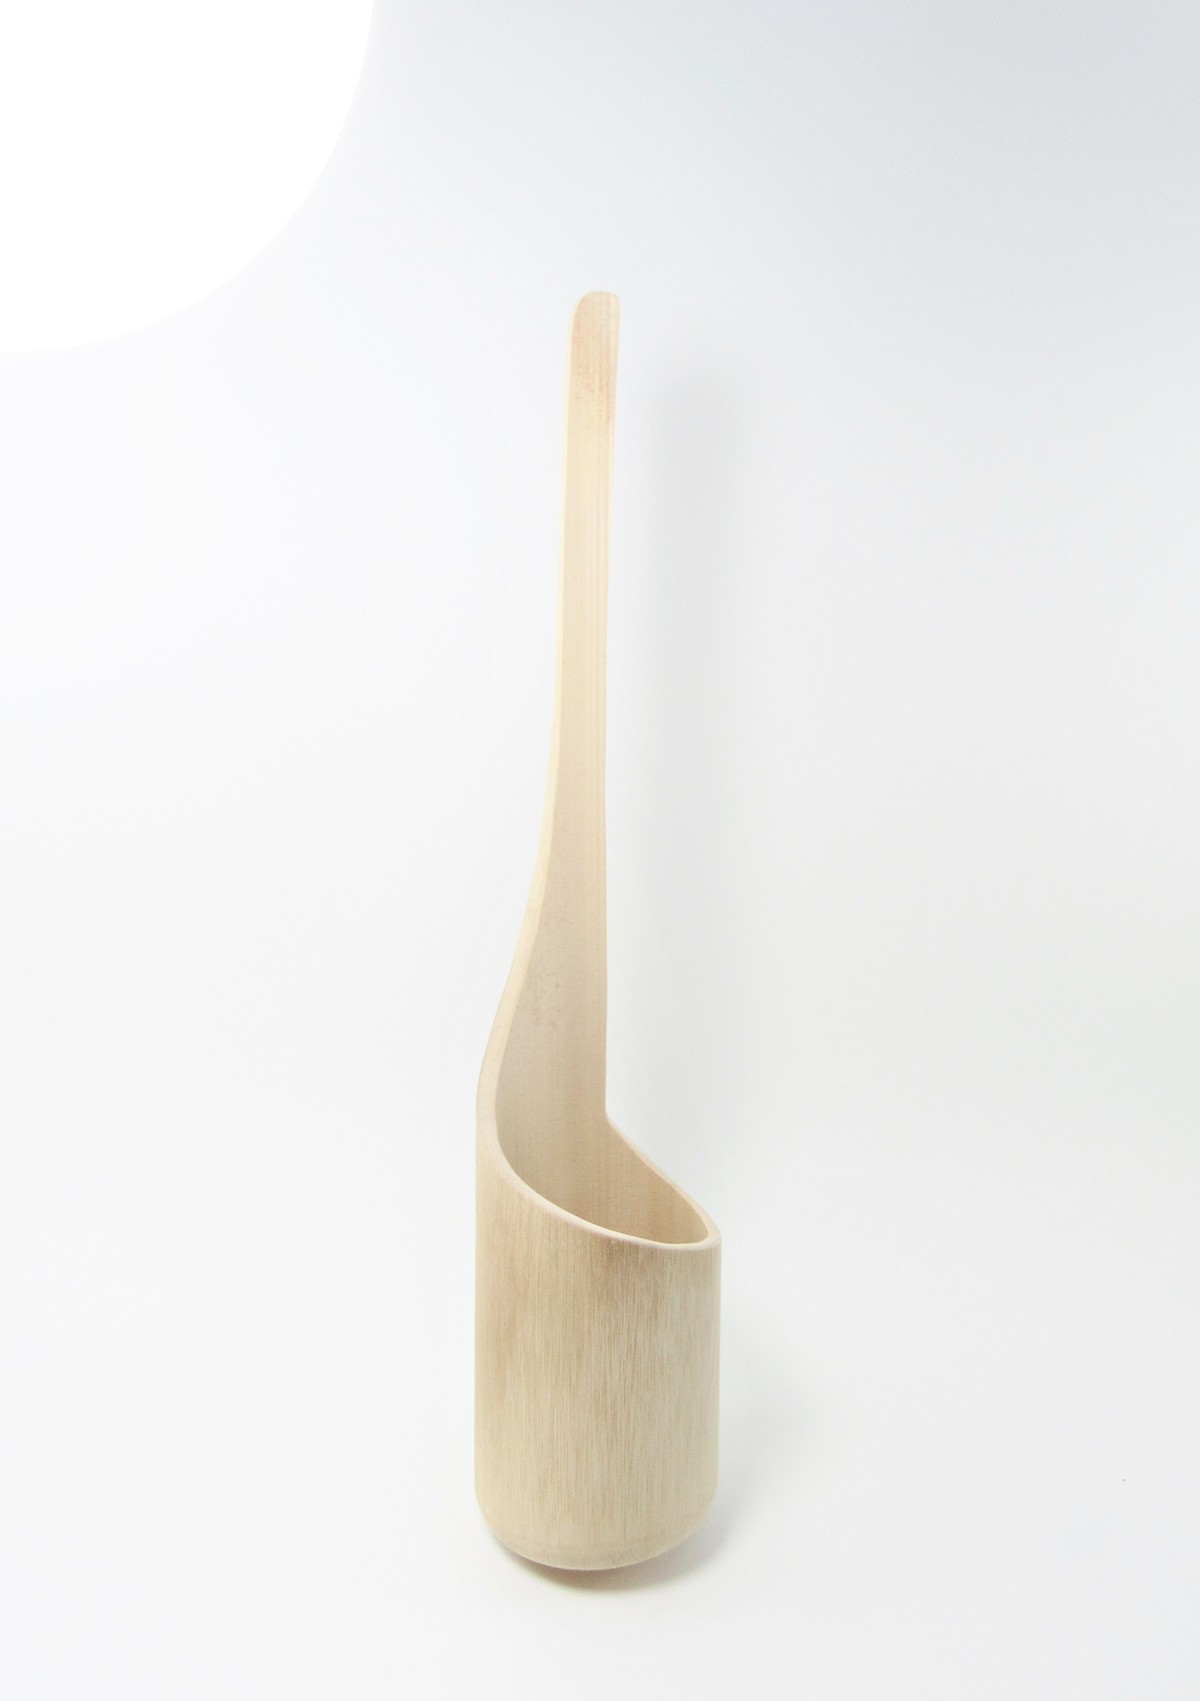 spoon bamboo design product industrial Sustainable eco material Nature Soup